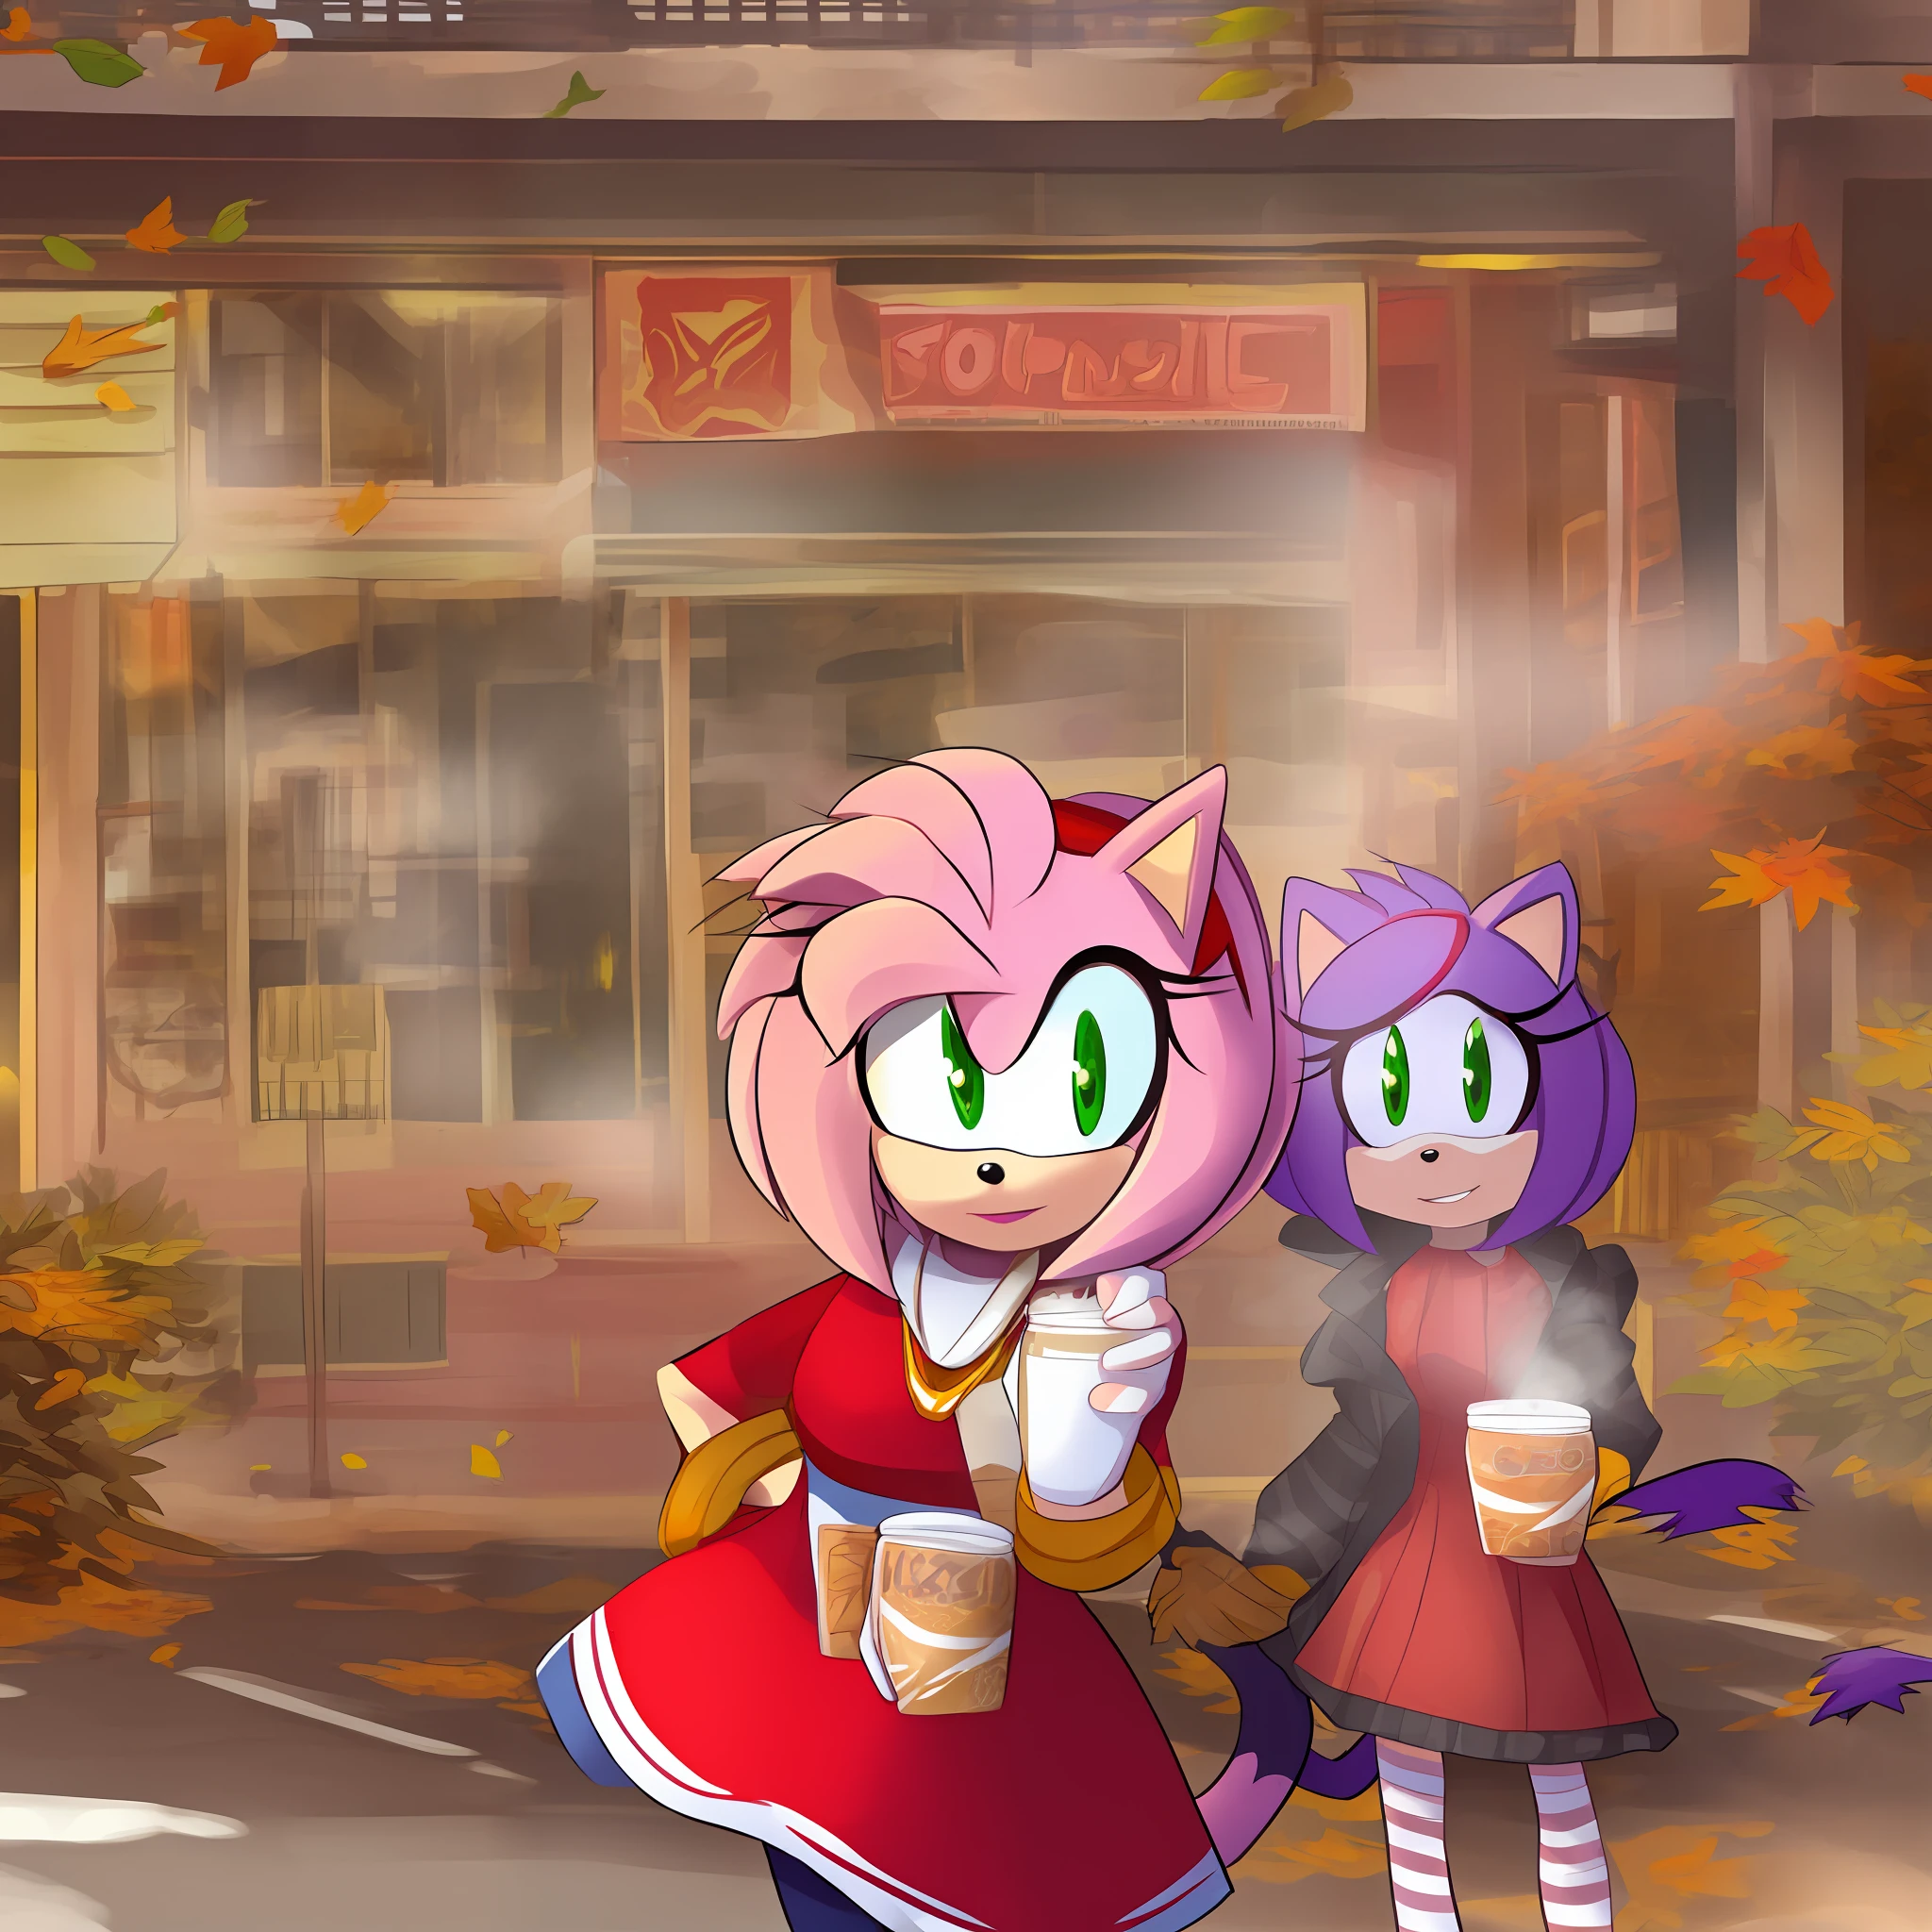 Style-rustmagic, (((Amy Rose : Blaze the cat : .75))), (latex dress, (Red dress, (white stripe))), coffee, outside, cityscape, outside cafe, steaming cup, leaves in wind, (fall), (smile), looking at viewer, jacket over dress, gold necklace,